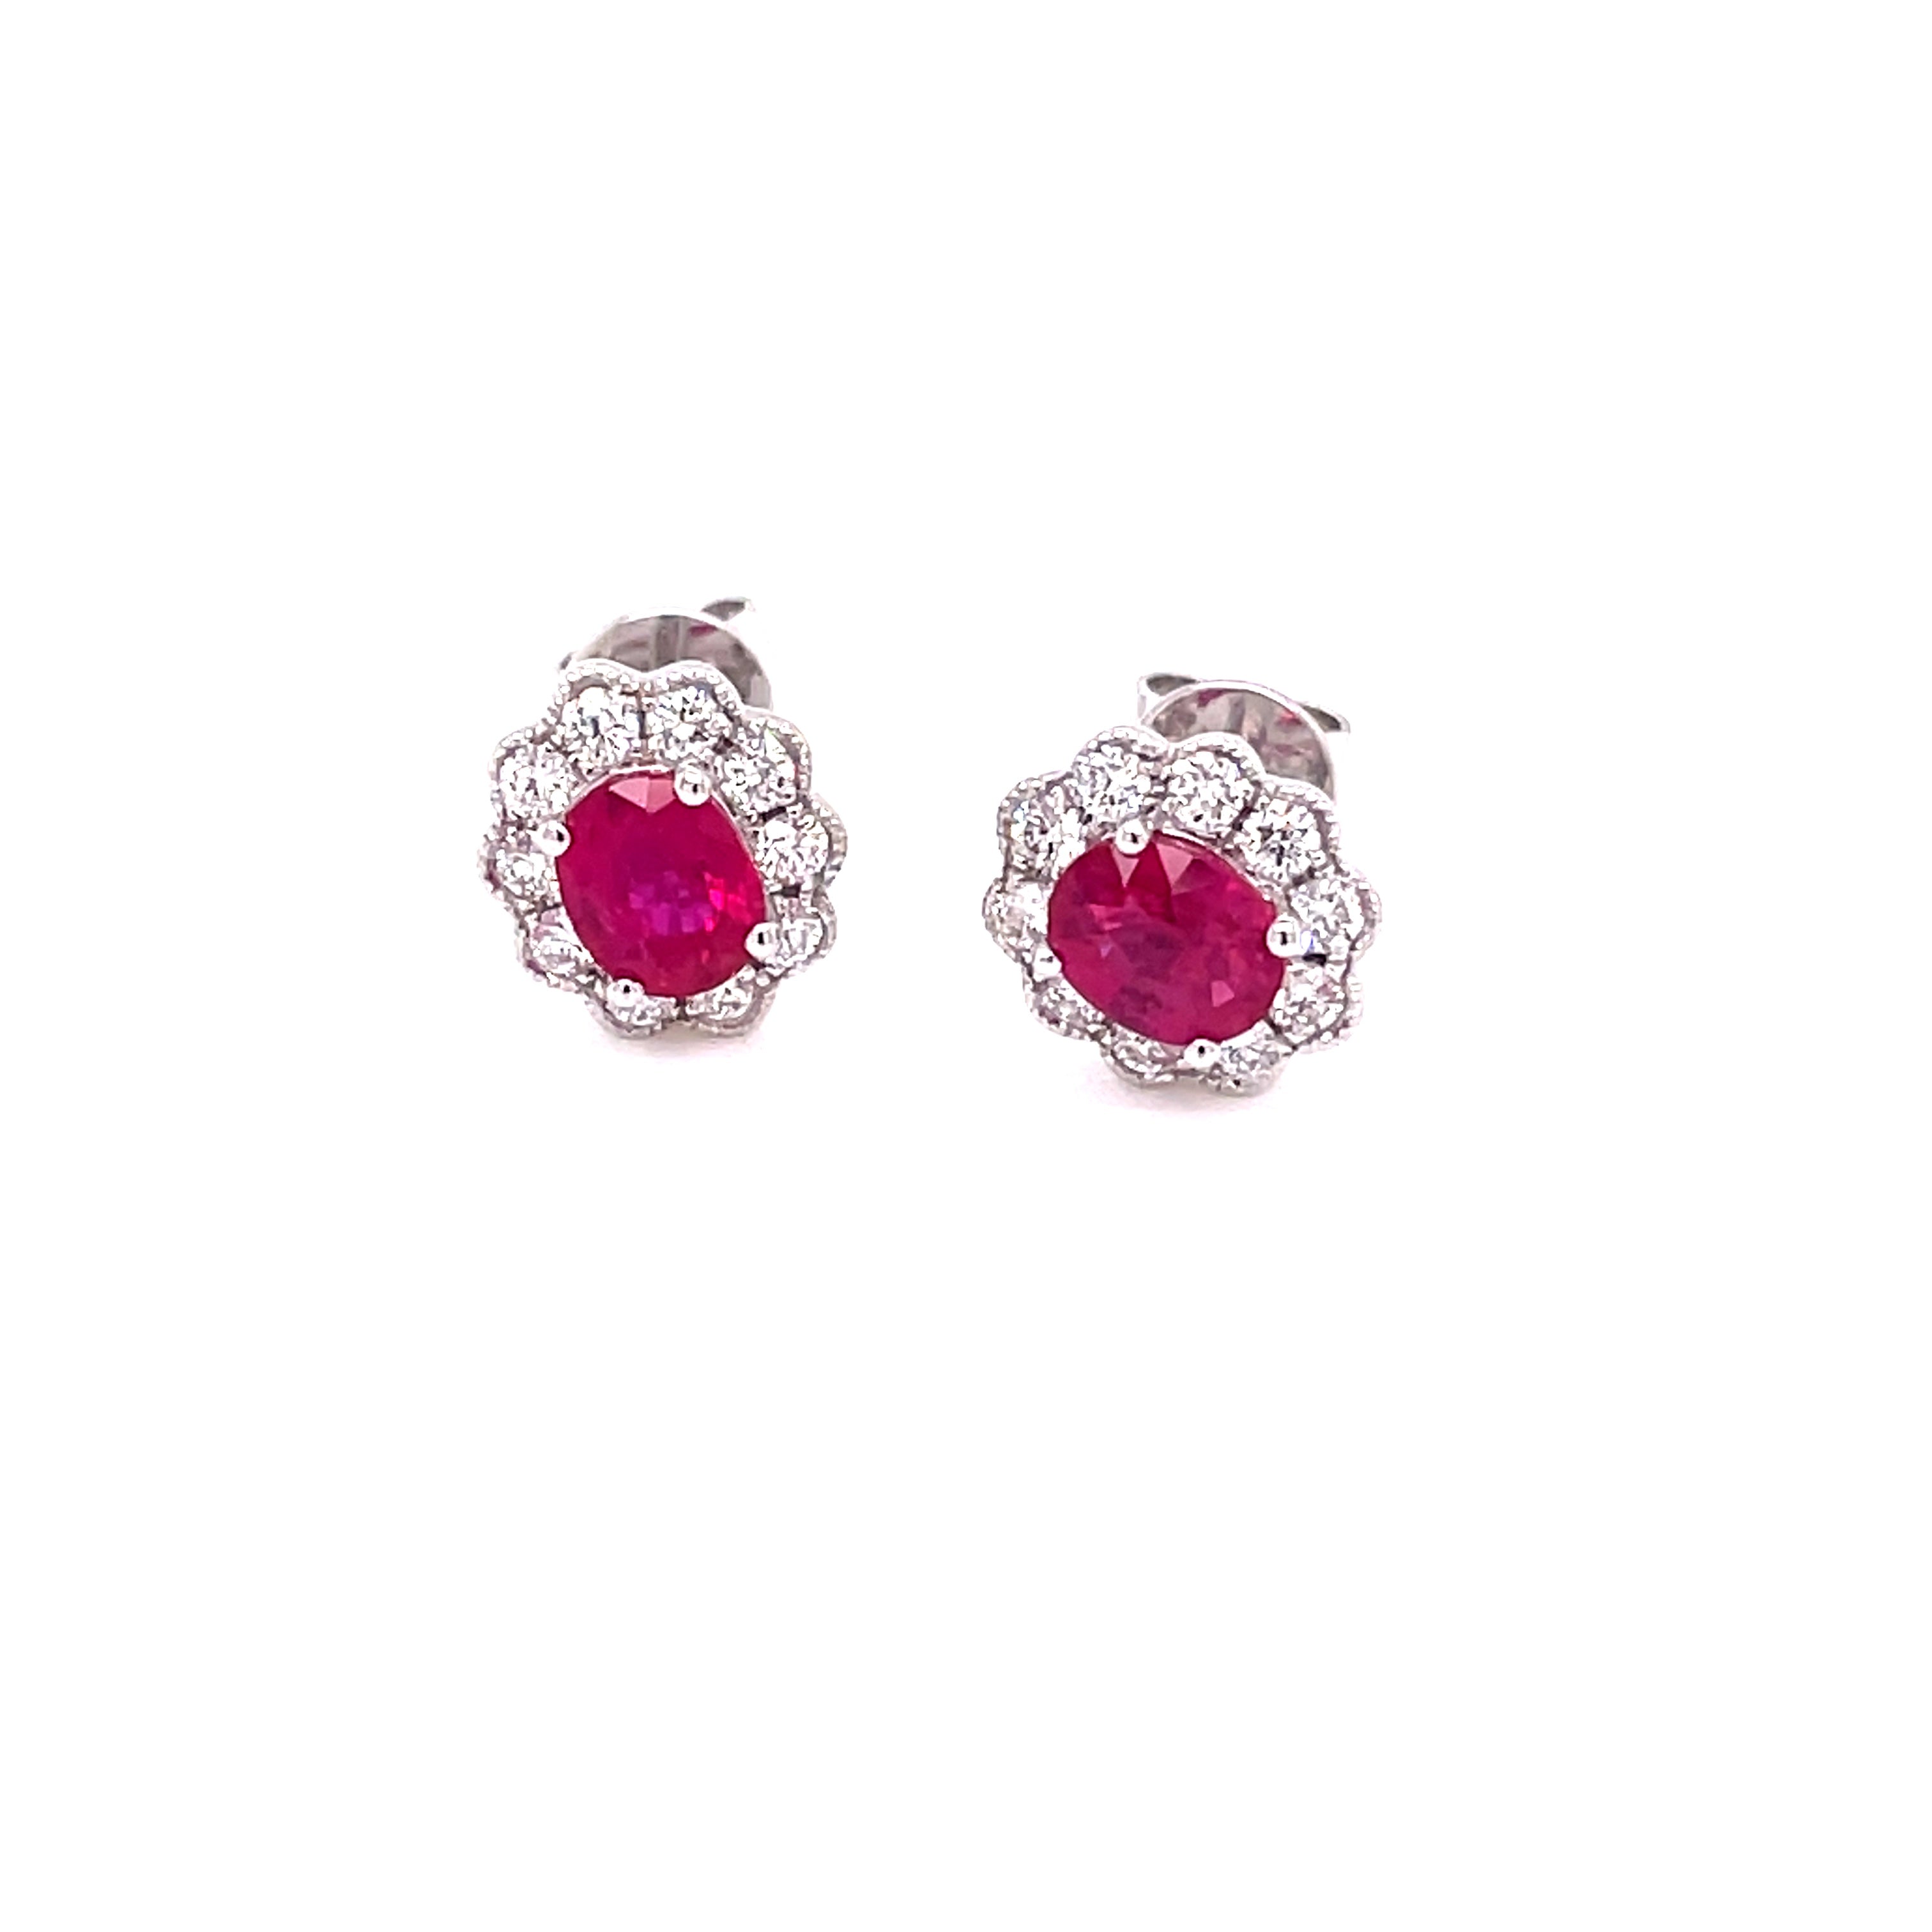 Pre-Owned 14ct White Gold 1.90ct Ruby and 0.65ct Diamond Stud Earrings  GMC(108/11/1)